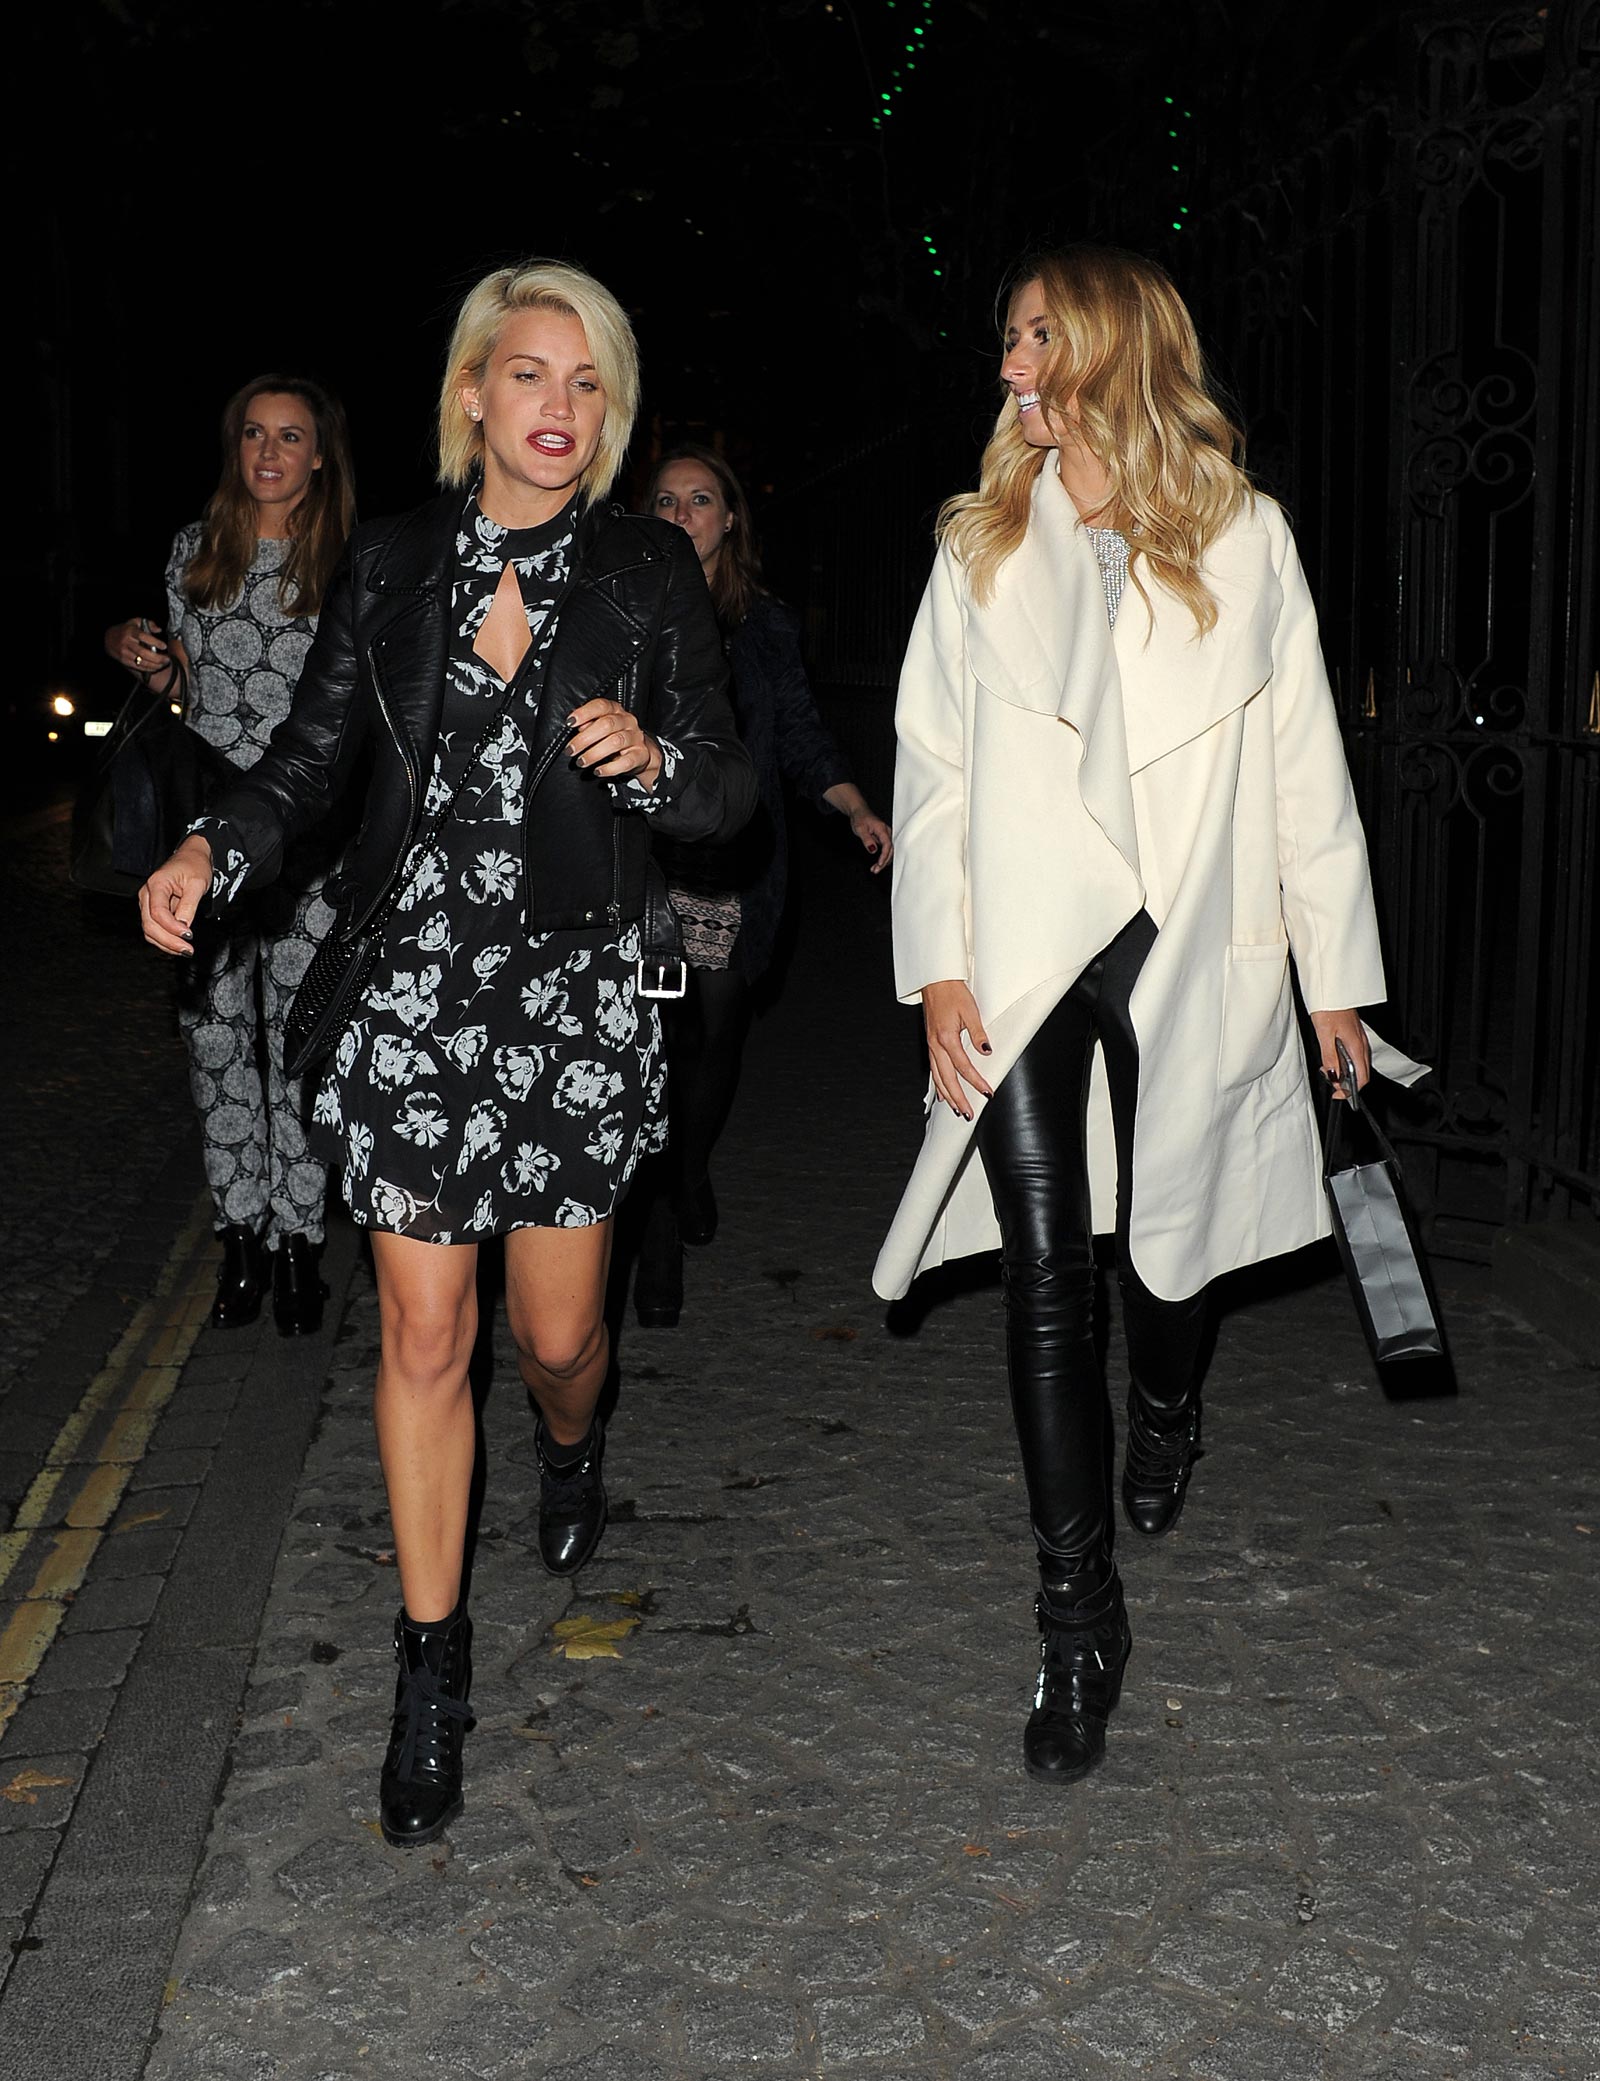 Ashley Roberts & Stacey Solomon attend Comedy Central’s FriendsFest launch party